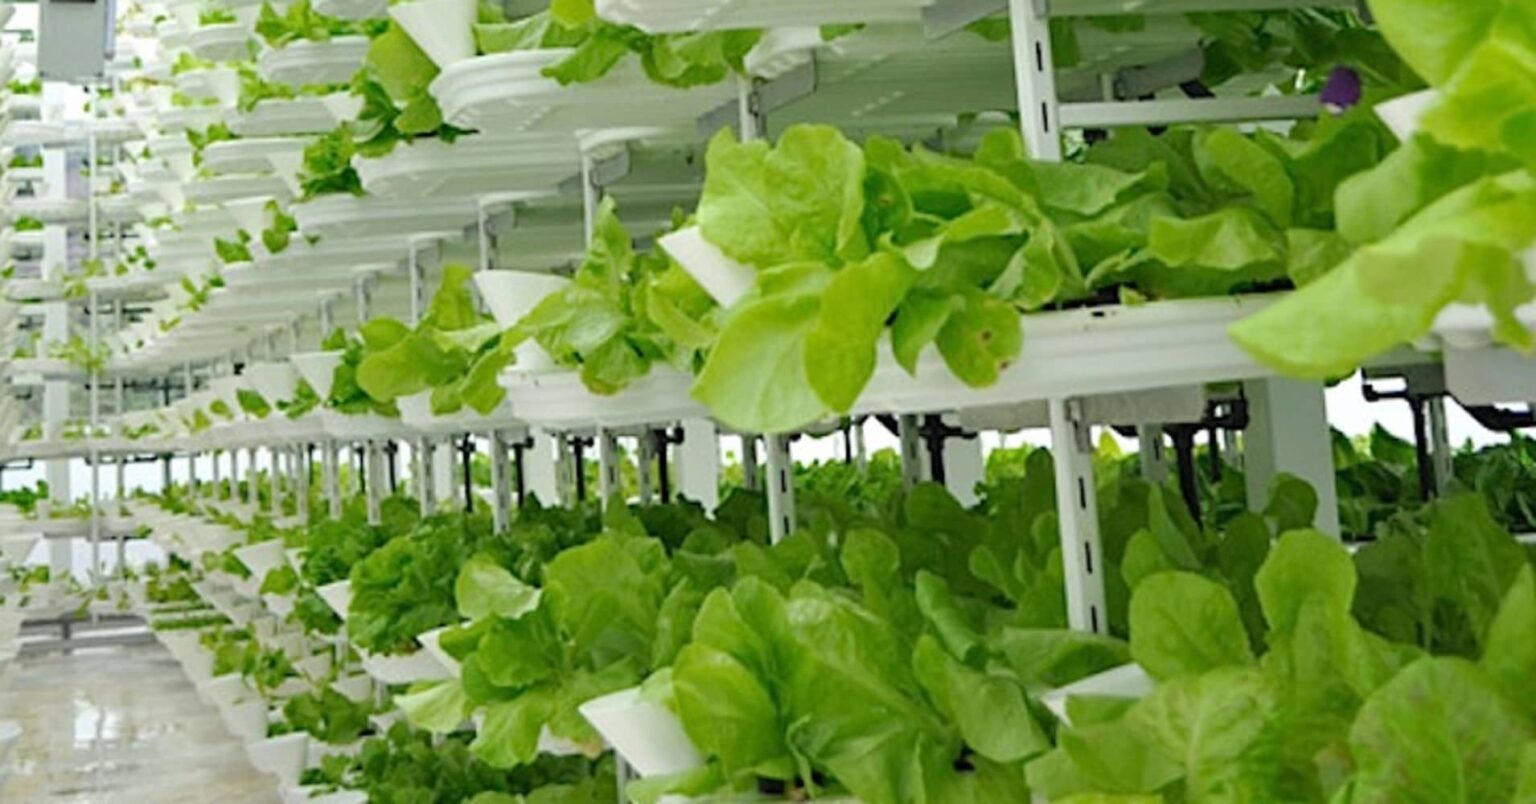 Vertical farming fosters a sustainable agricultural system where farms produce food without pesticides, herbicides, and fertilizers. How does it work?